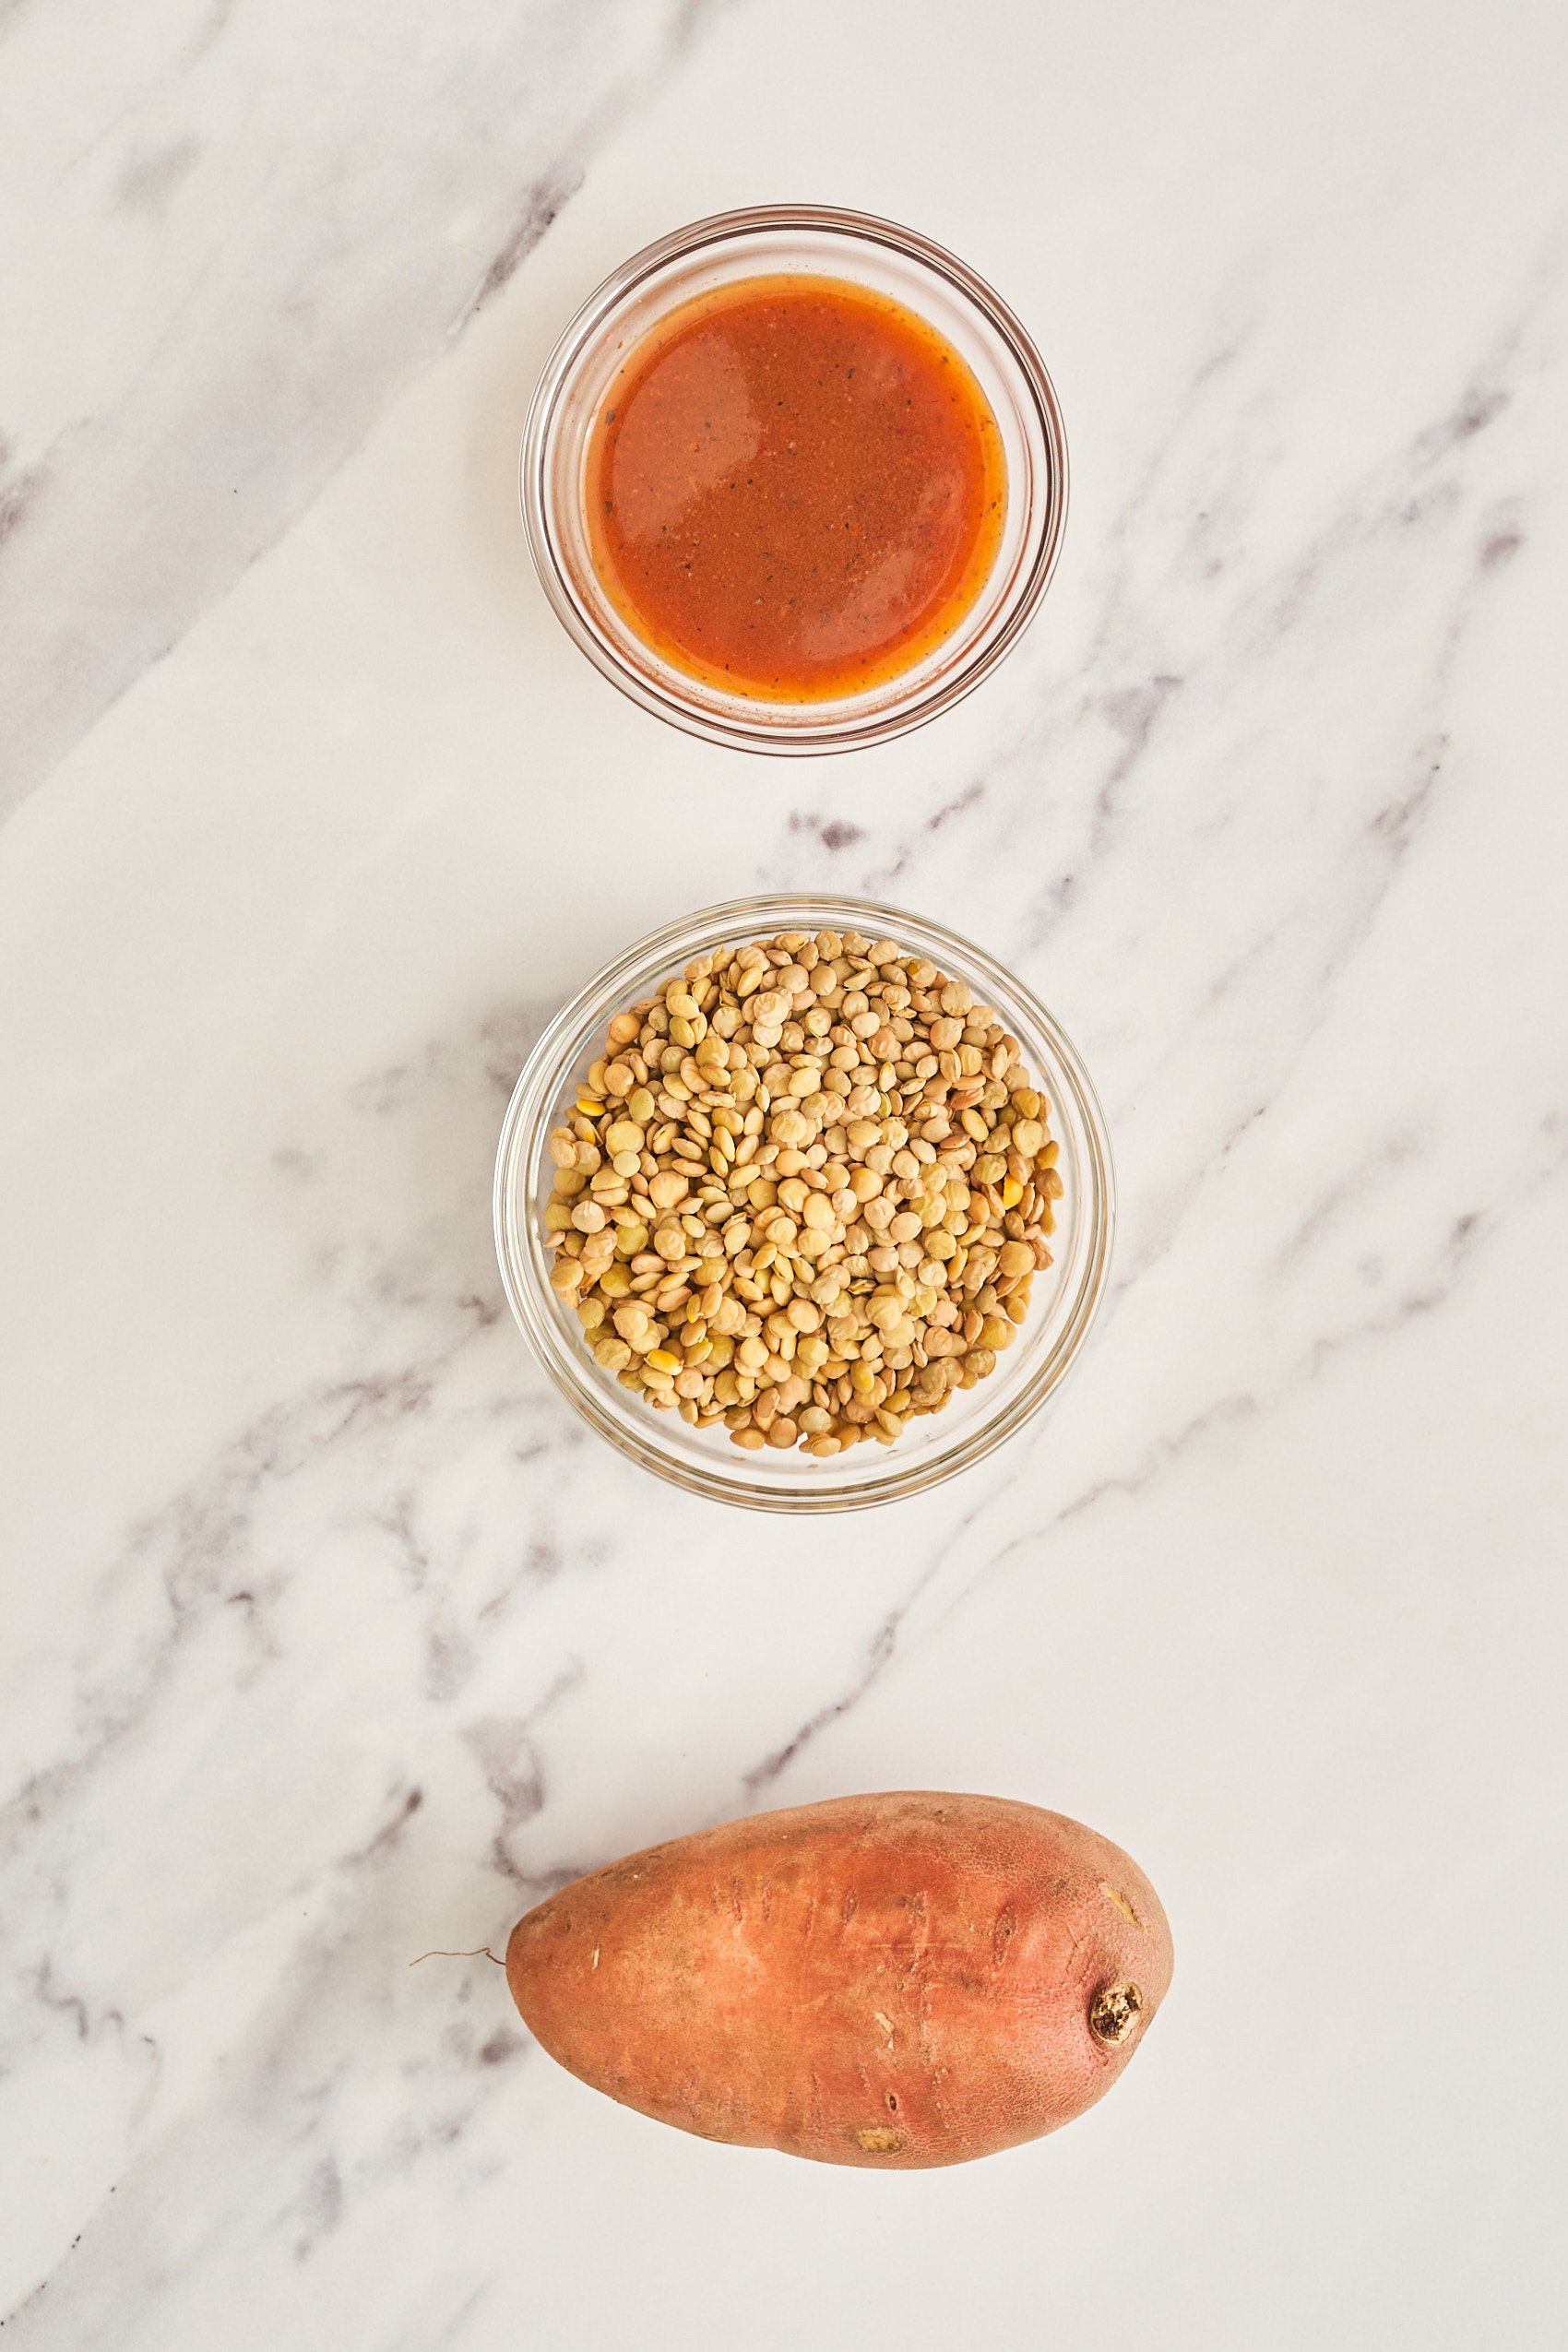 a selection of ingredients separated into small bowls, including a bowl of hot sauce, a bowl of green lentils and a whole sweet potato